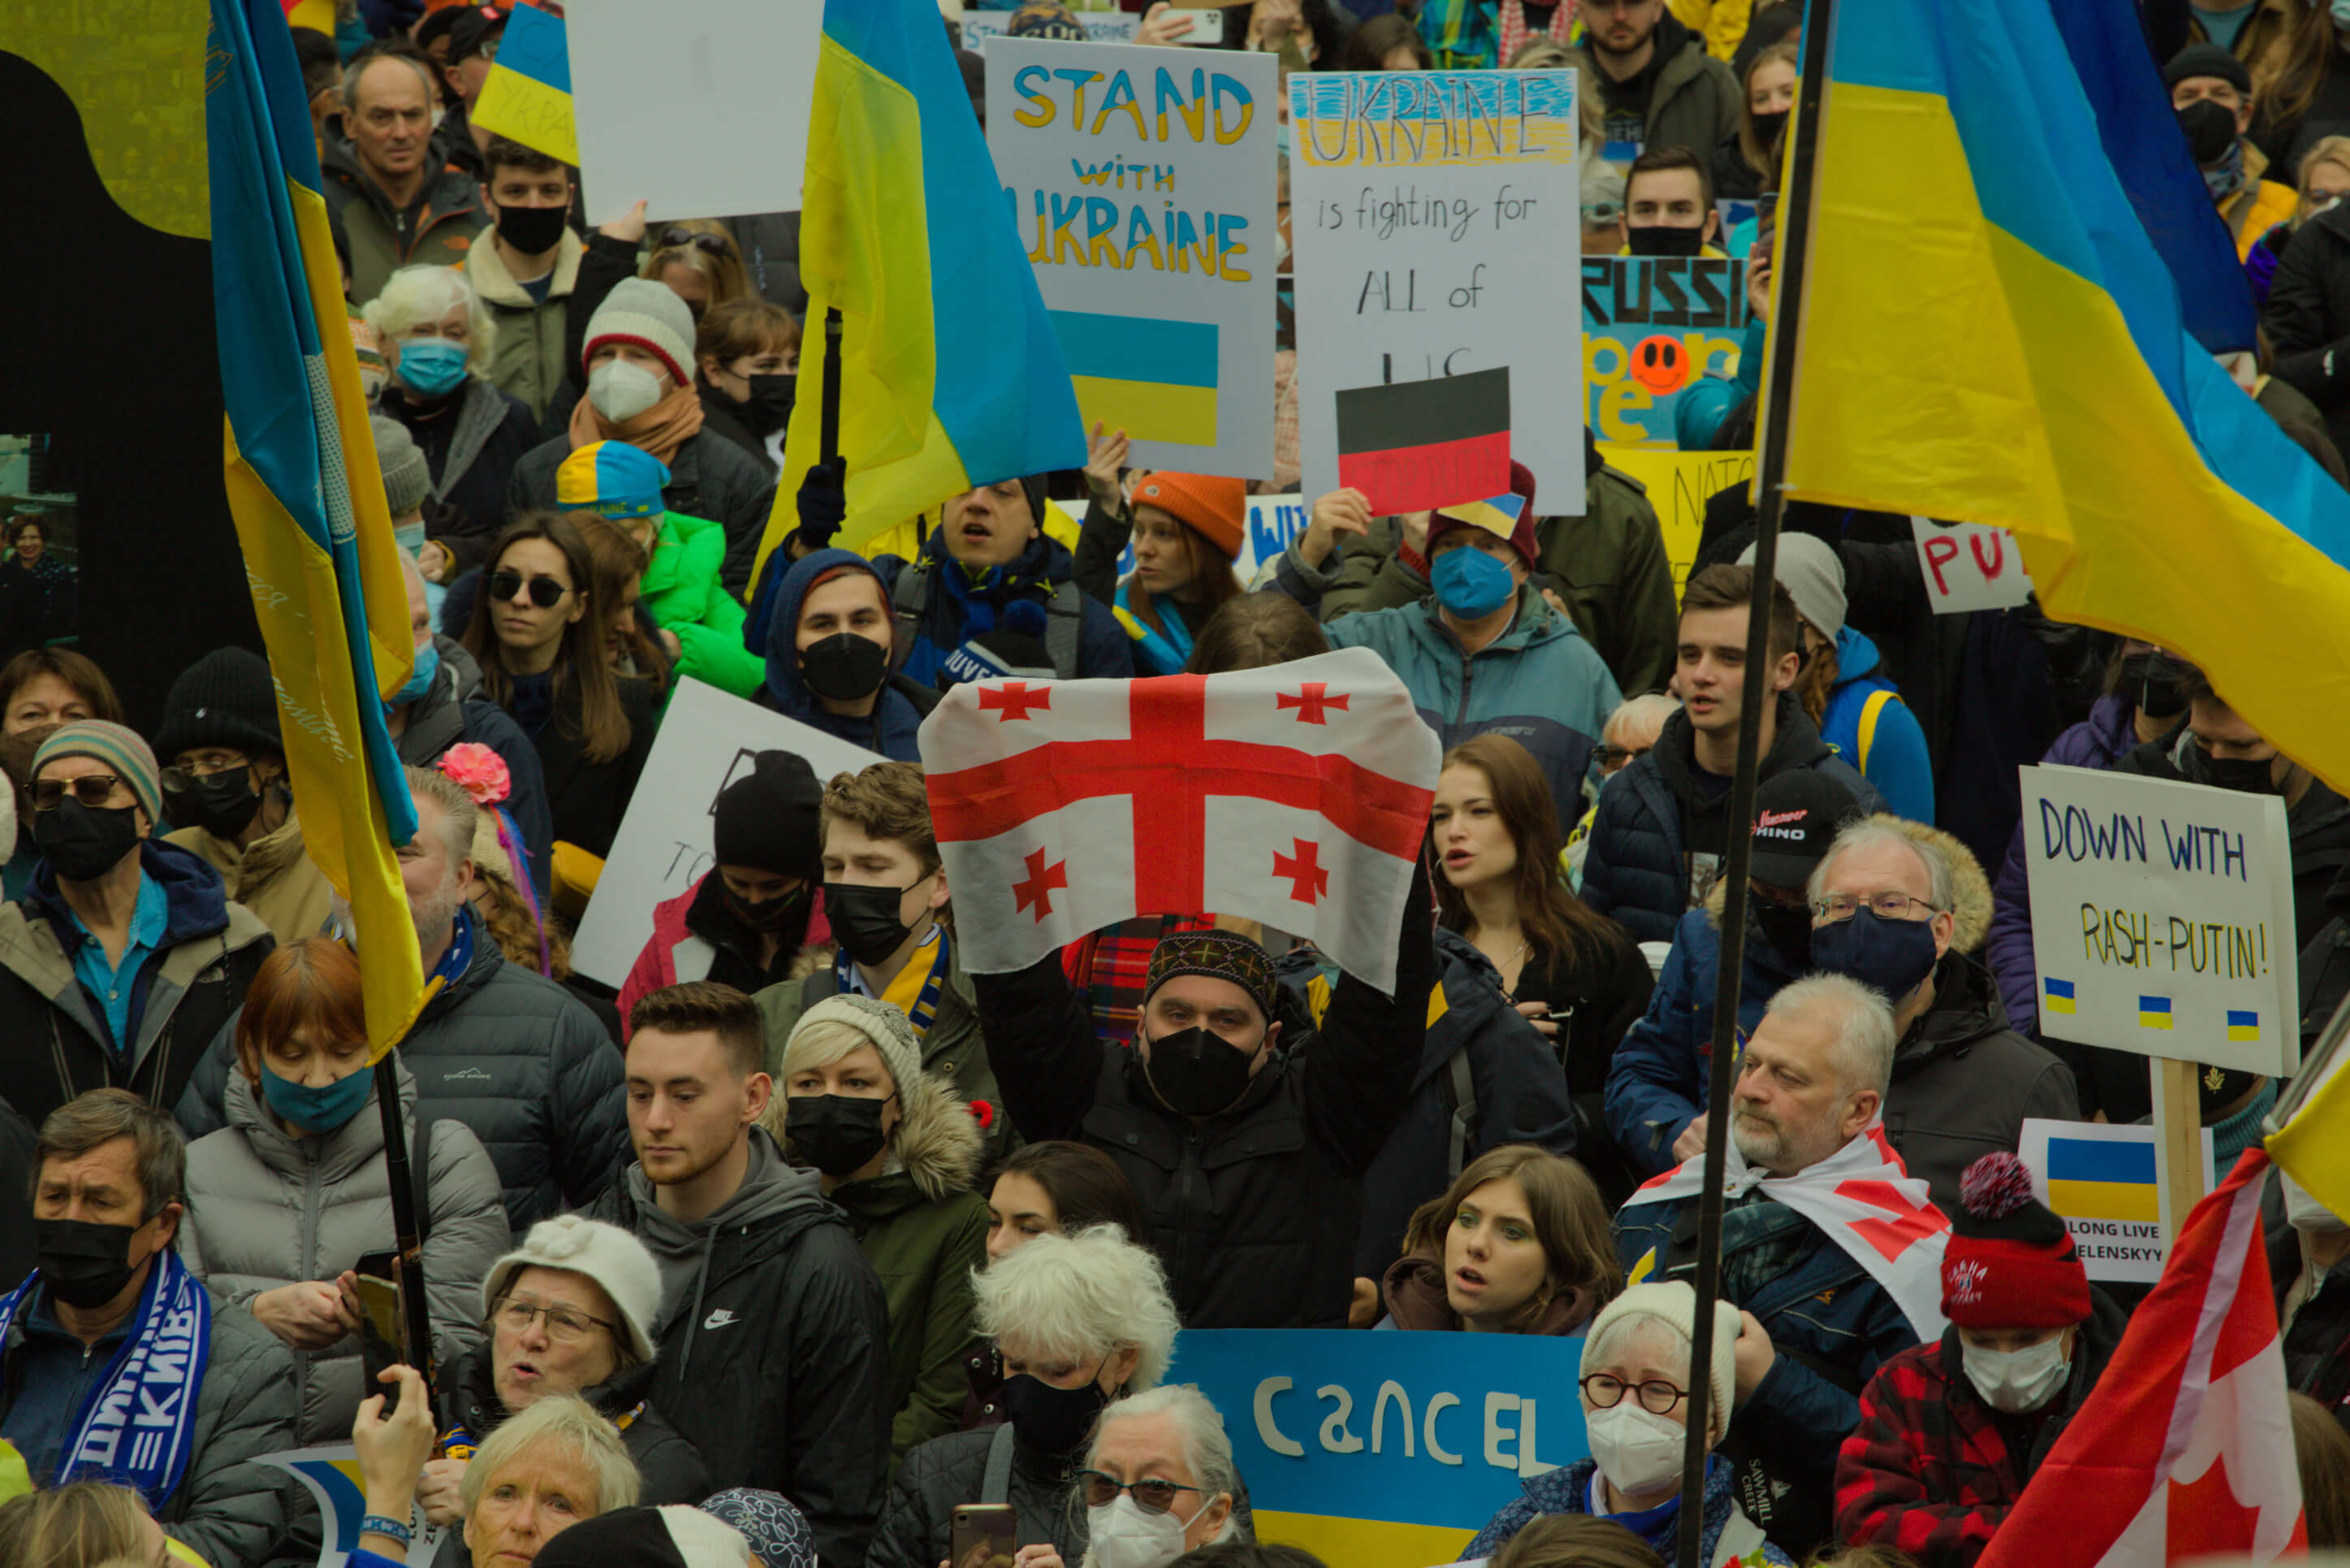 a person is holding up a Georgian flag among protesters holding up Ukrainian flags 